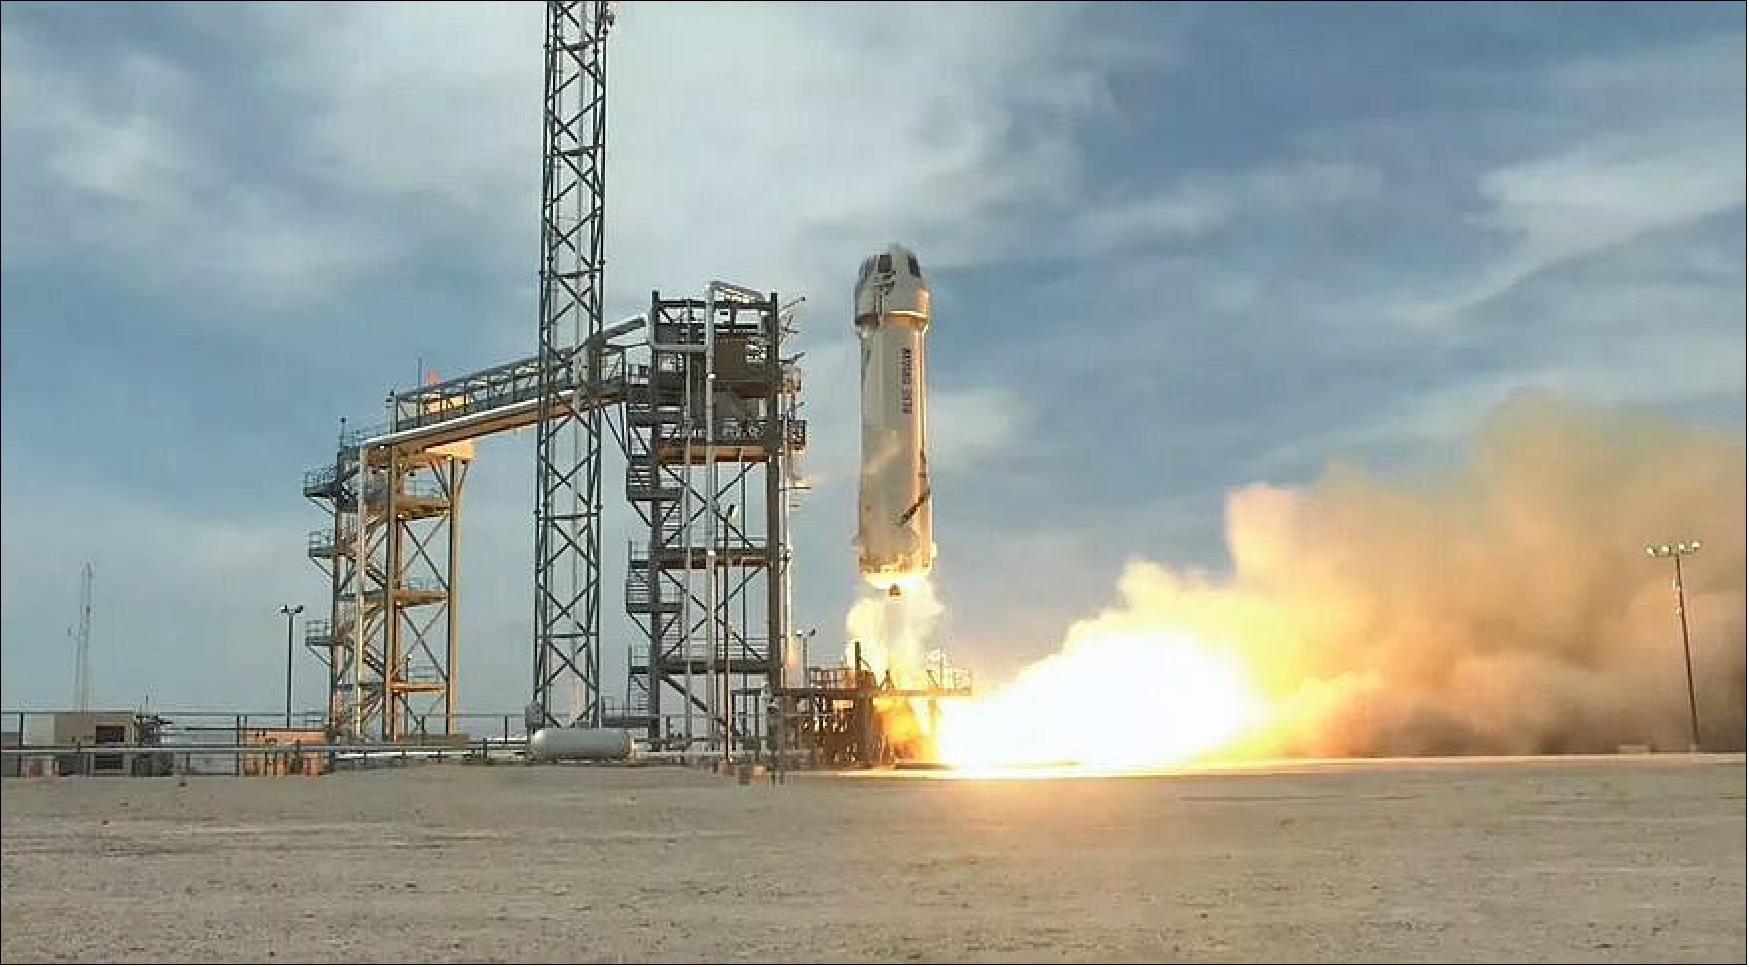 Figure 25: Blue Origin’s New Shepard suborbital vehicle lifts off April 14 from the company’s West Texas test site (image credit: Blue Origin webcast)